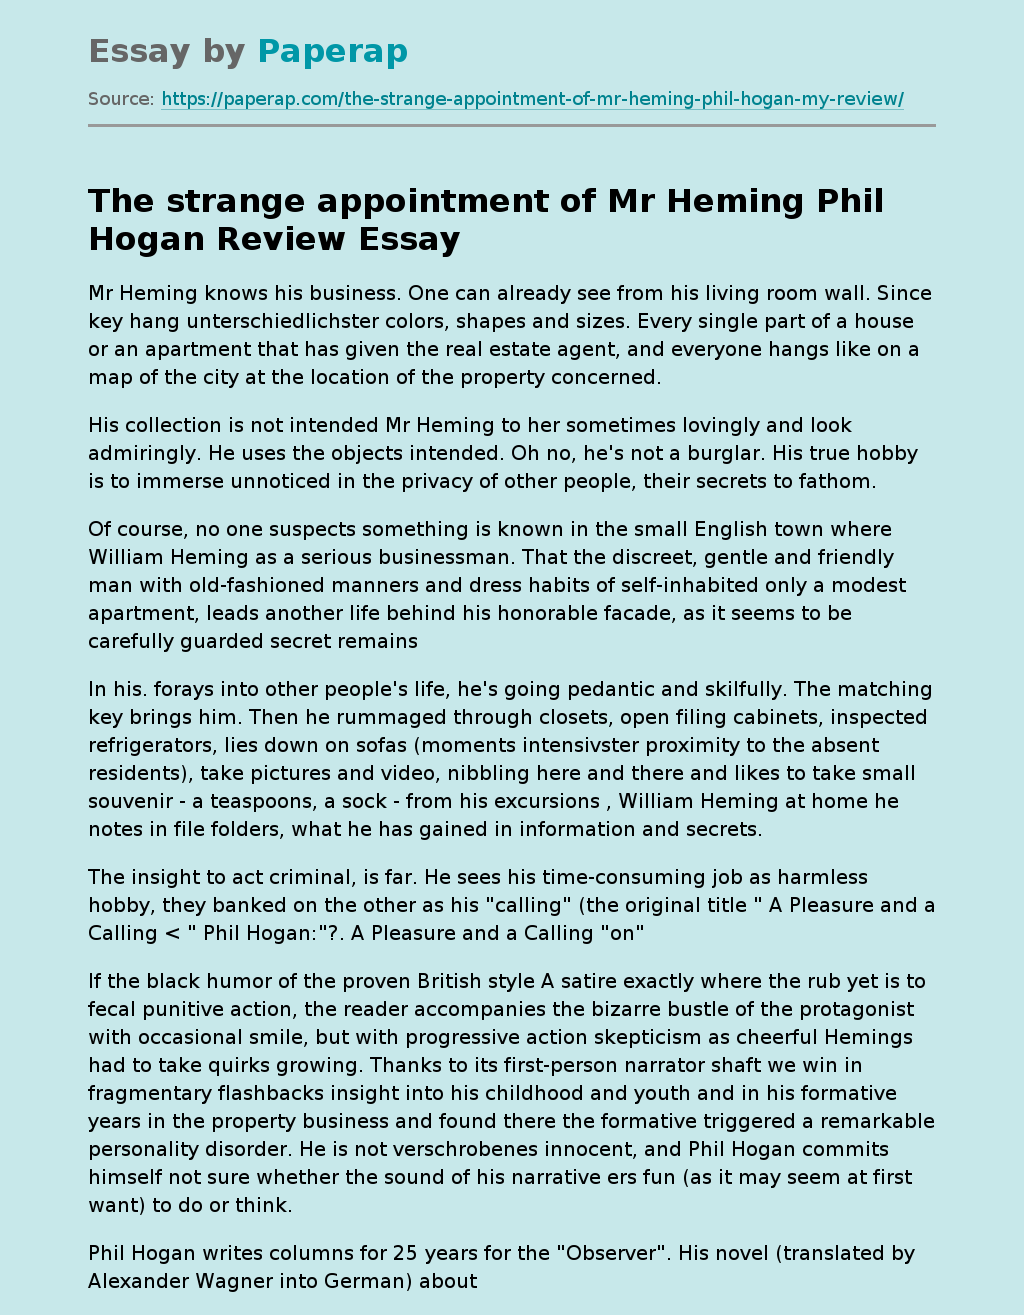 The Strange Appointment Of Mr Heming Phil Hogan Review